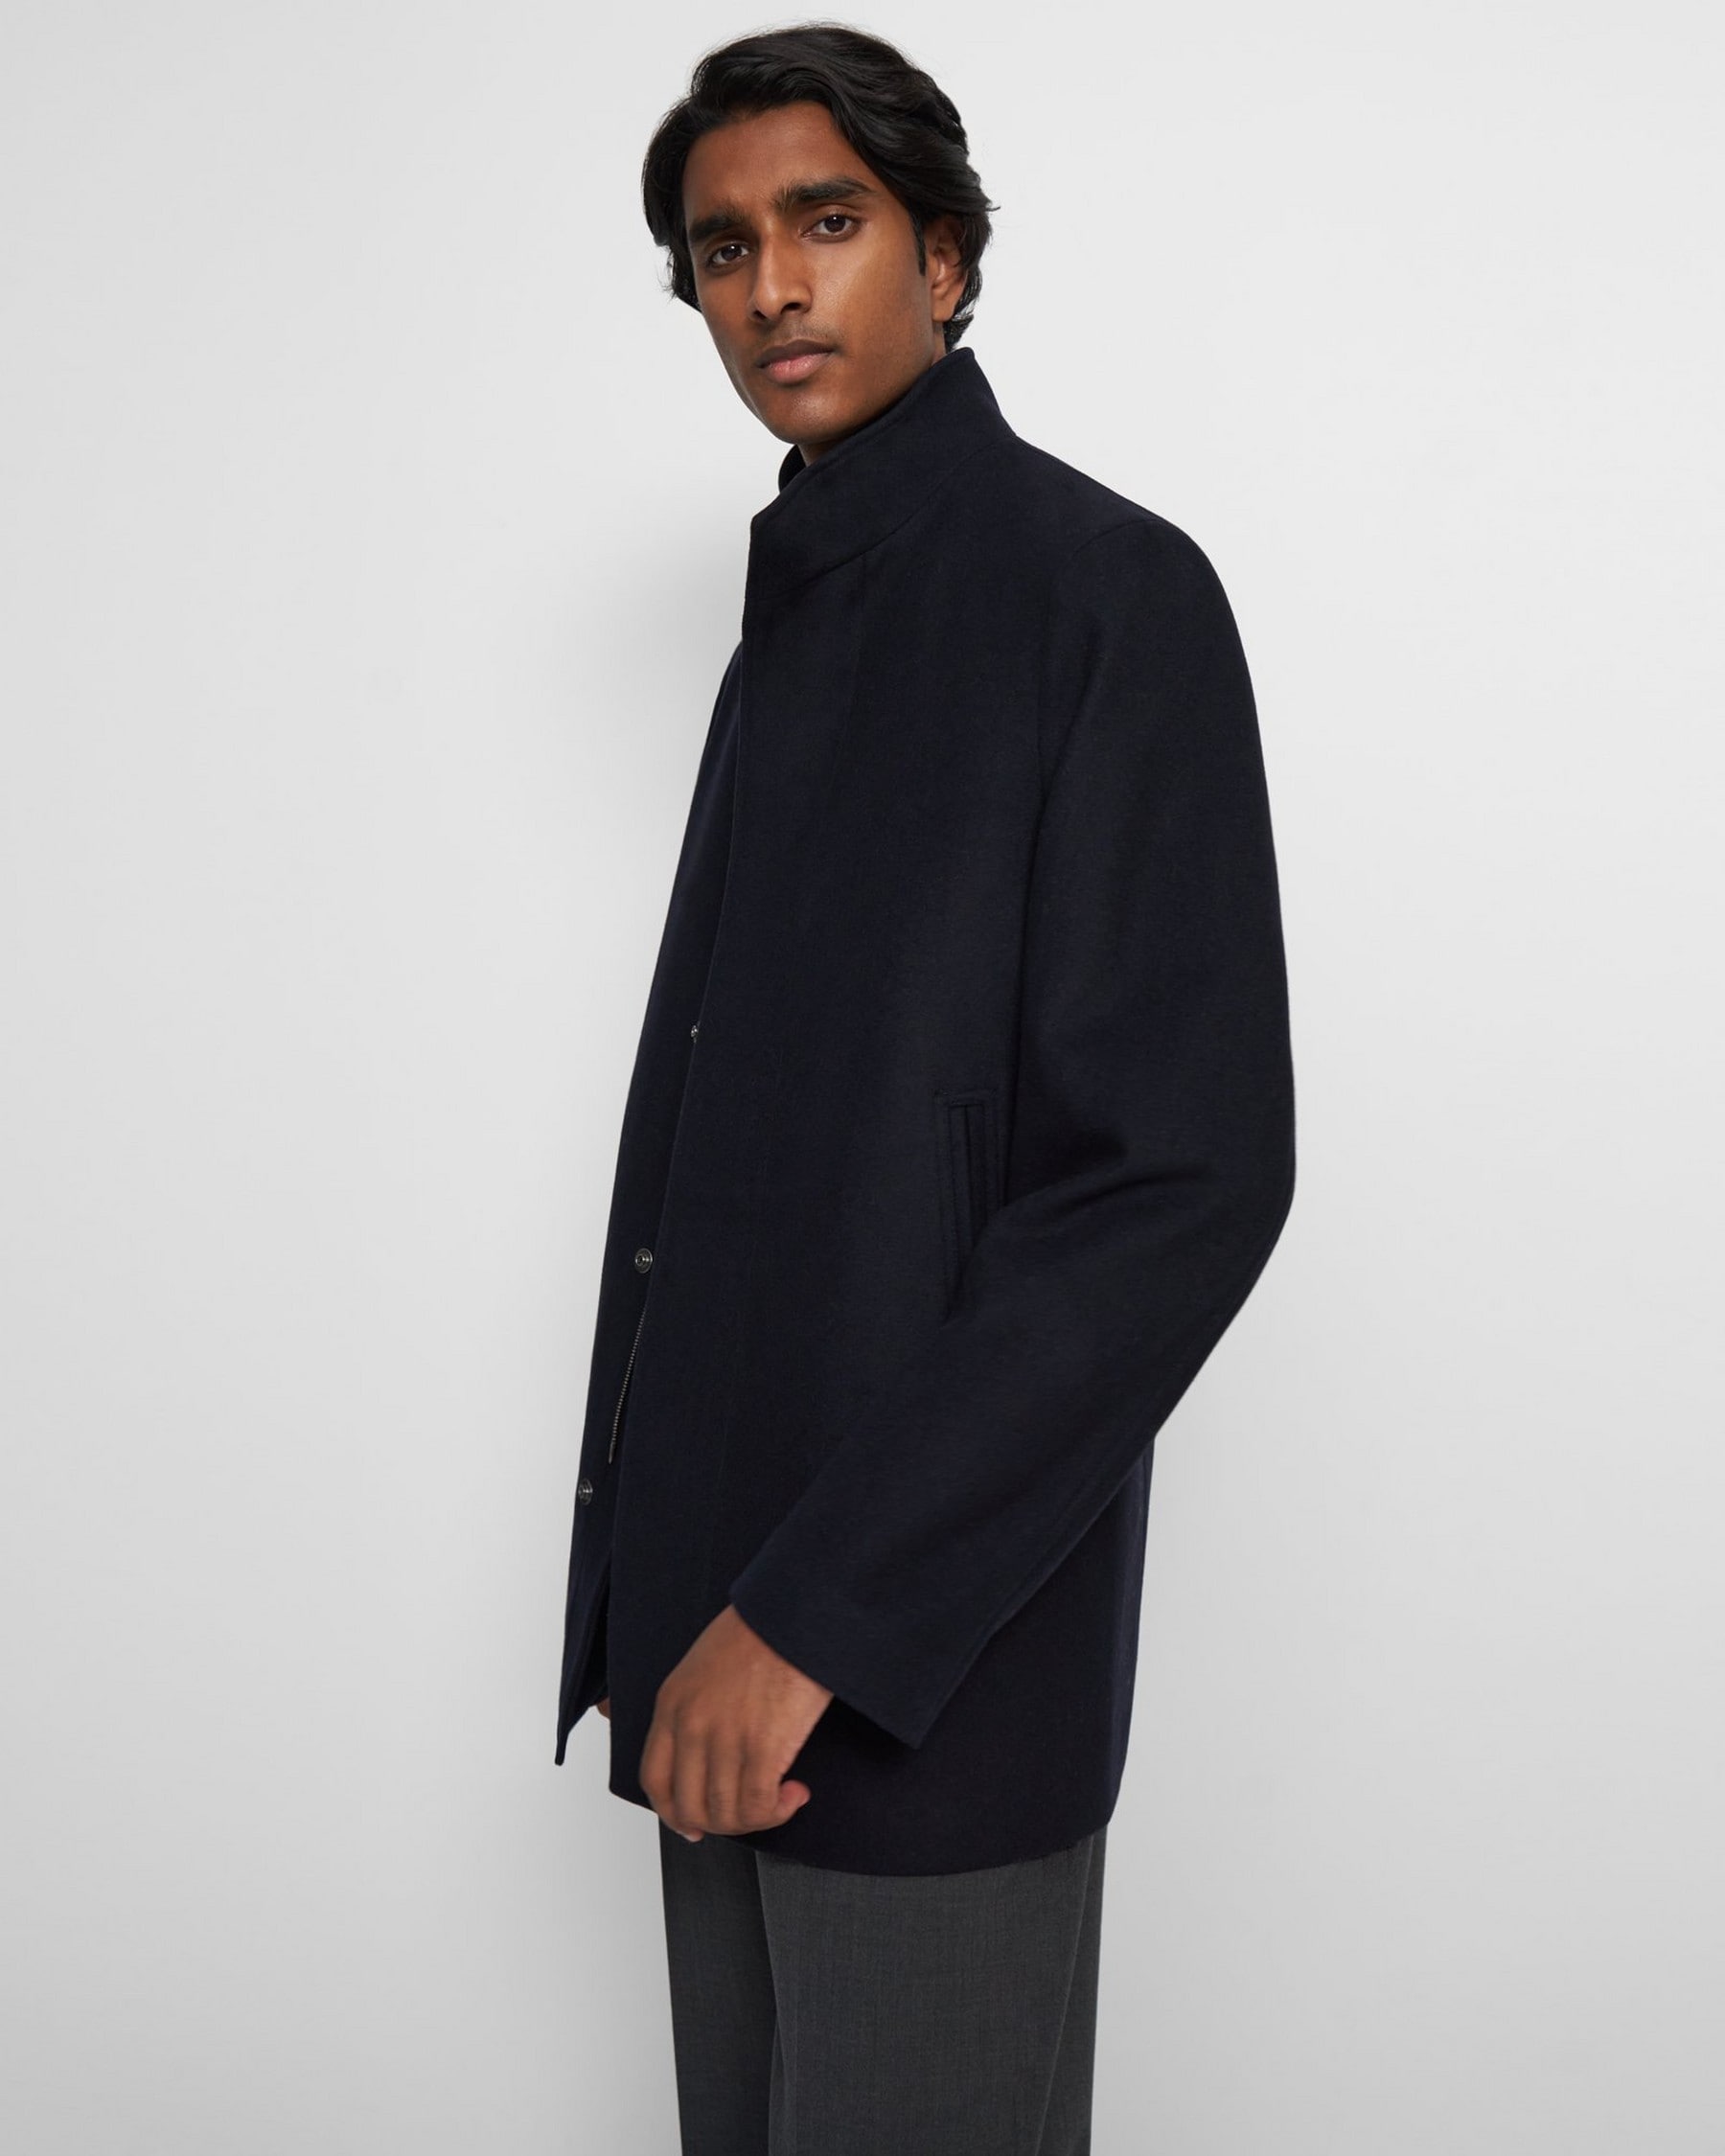 Clarence Jacket in Stretch Melton Wool